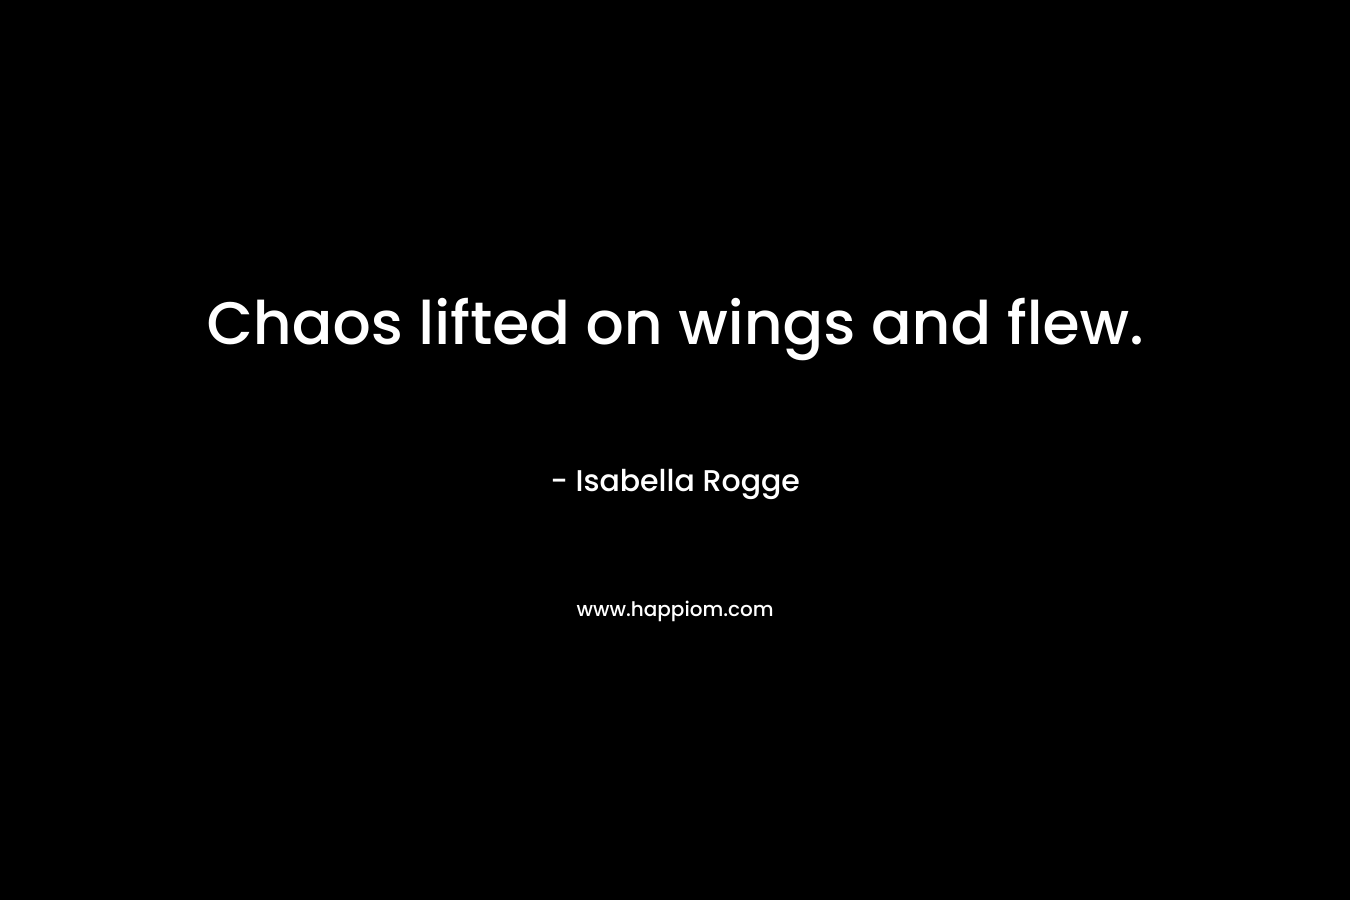 Chaos lifted on wings and flew.